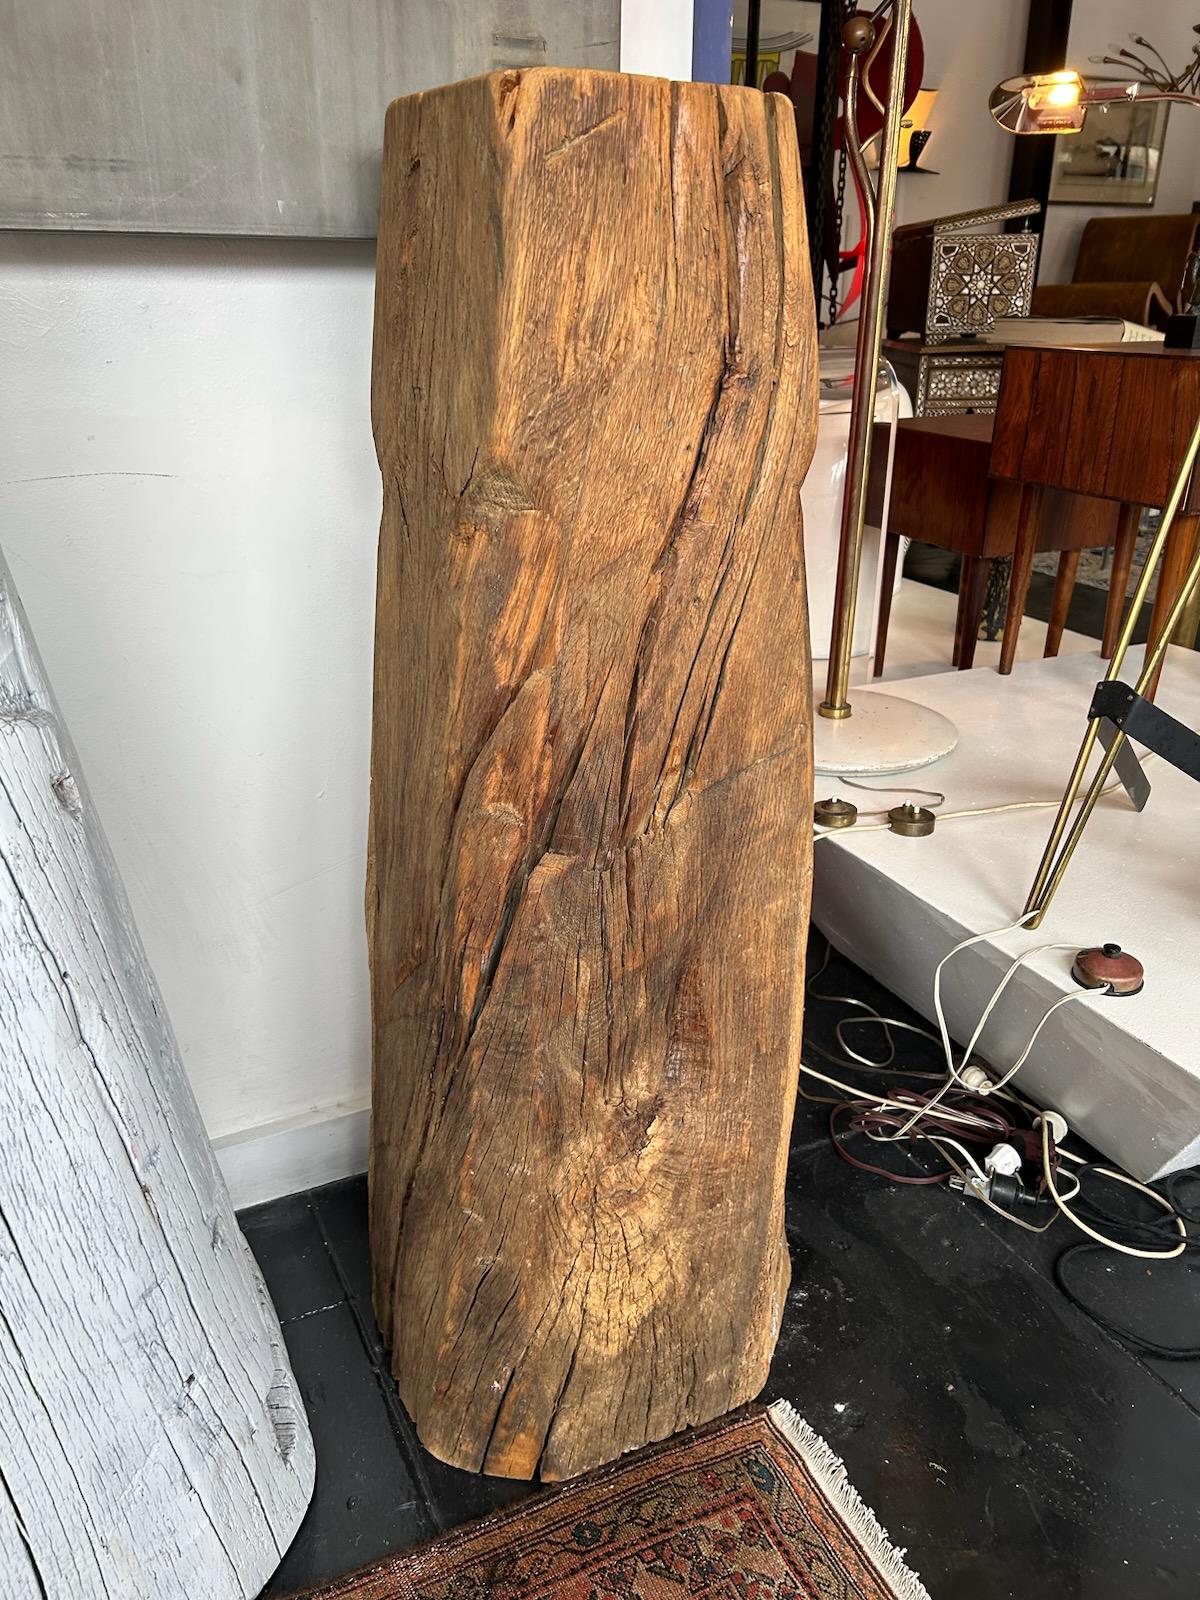 Brazilian Solid Wood Pedestal/Sculpture In Good Condition For Sale In Los Angeles, CA